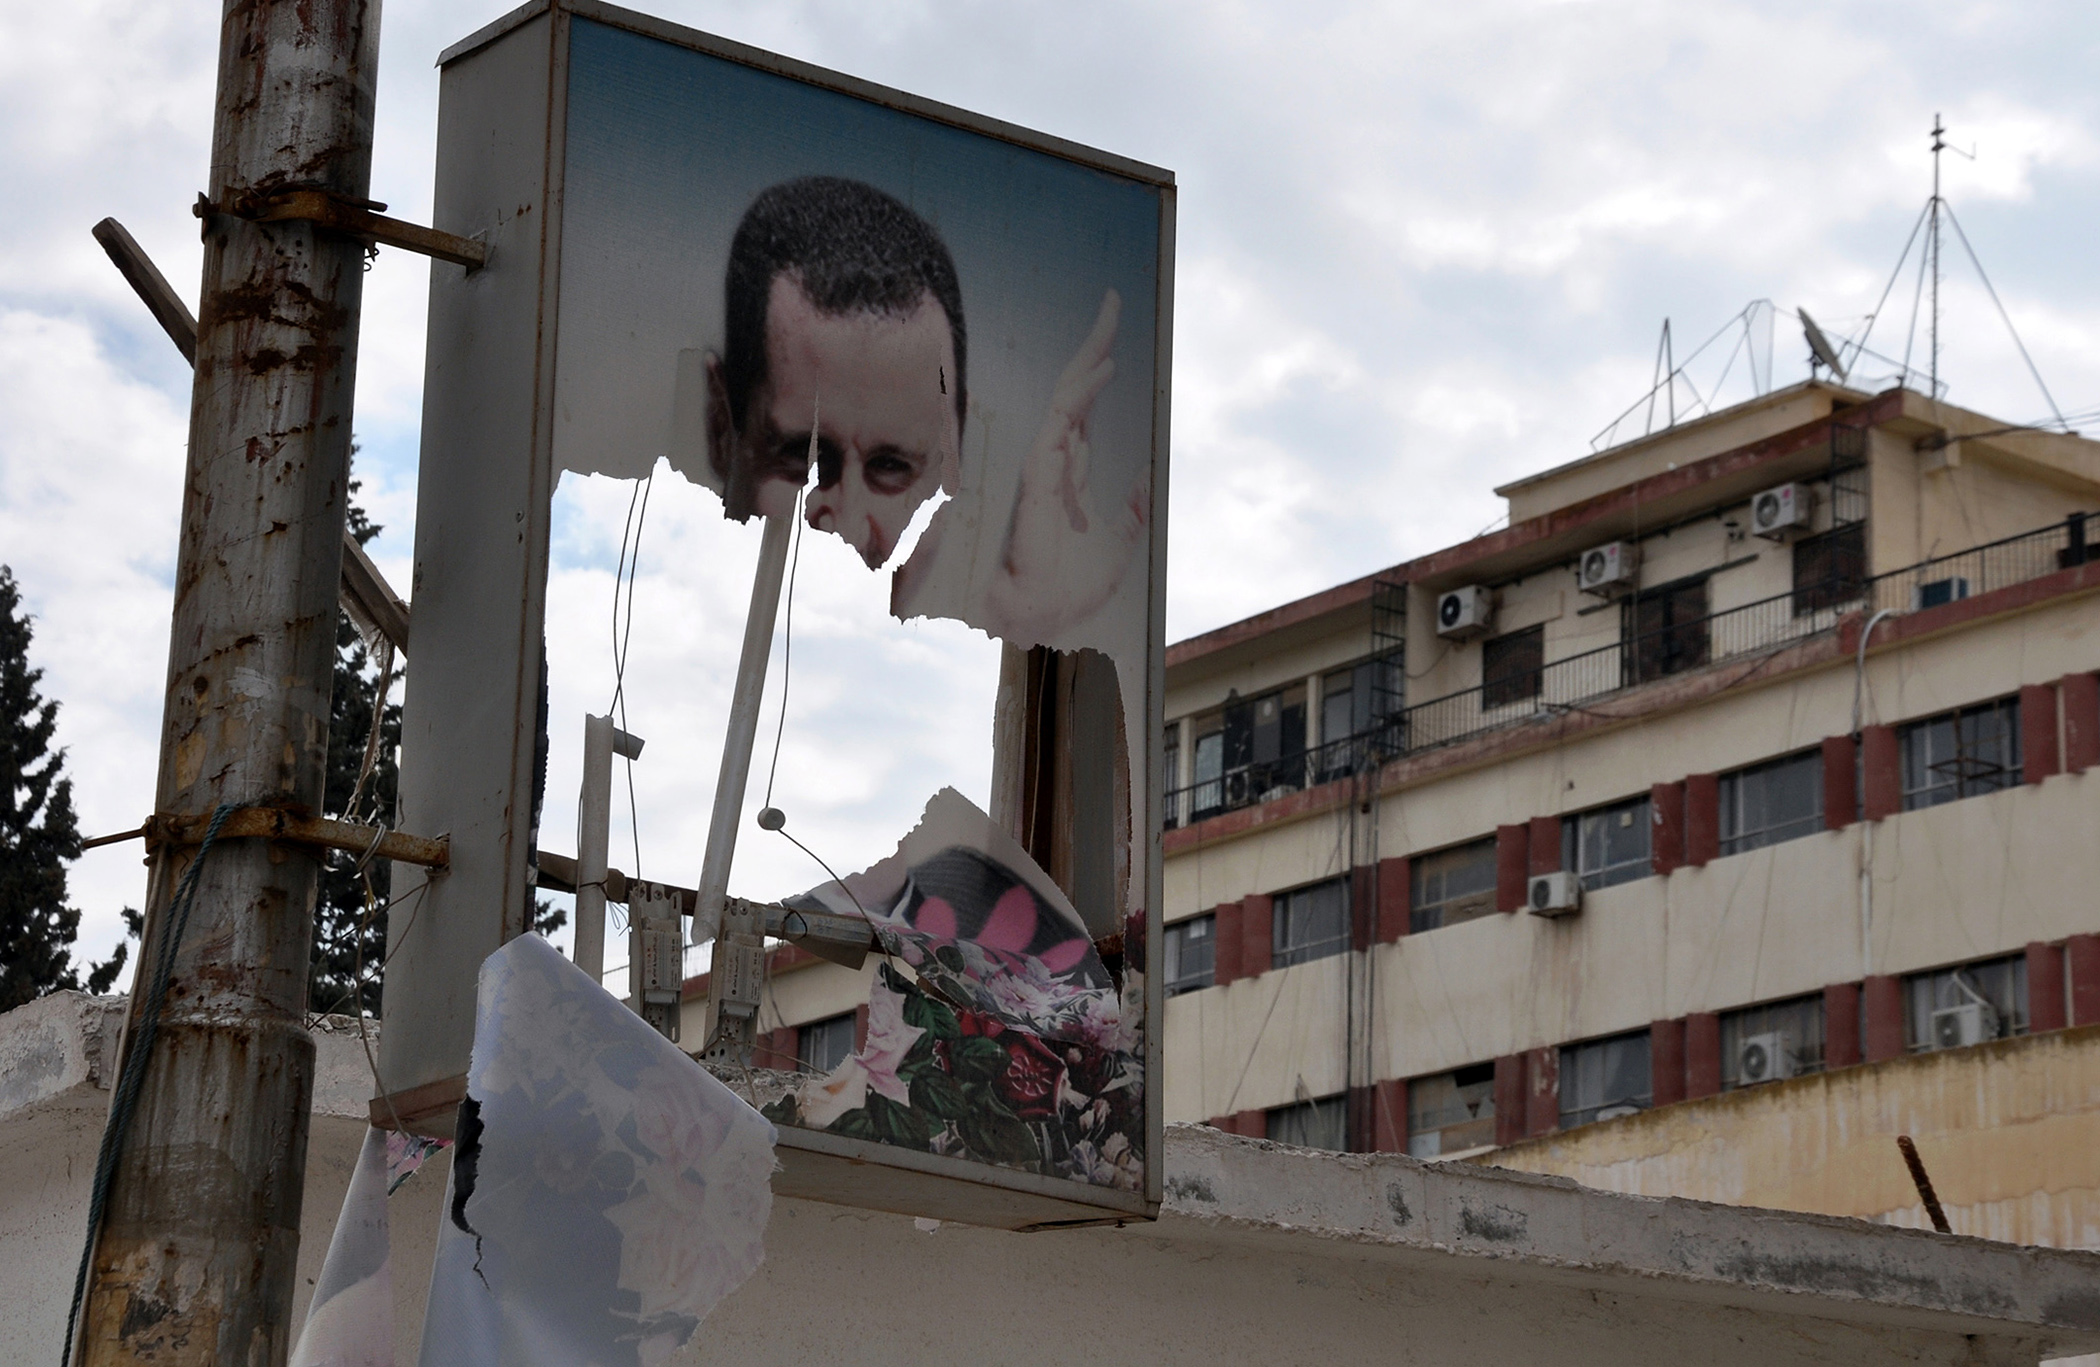 A ripped picture of Syrian President Bashar al-Assad hangs in the northern Syrian city of Raqqa following days of fierce fighting on March 5, 2013.
